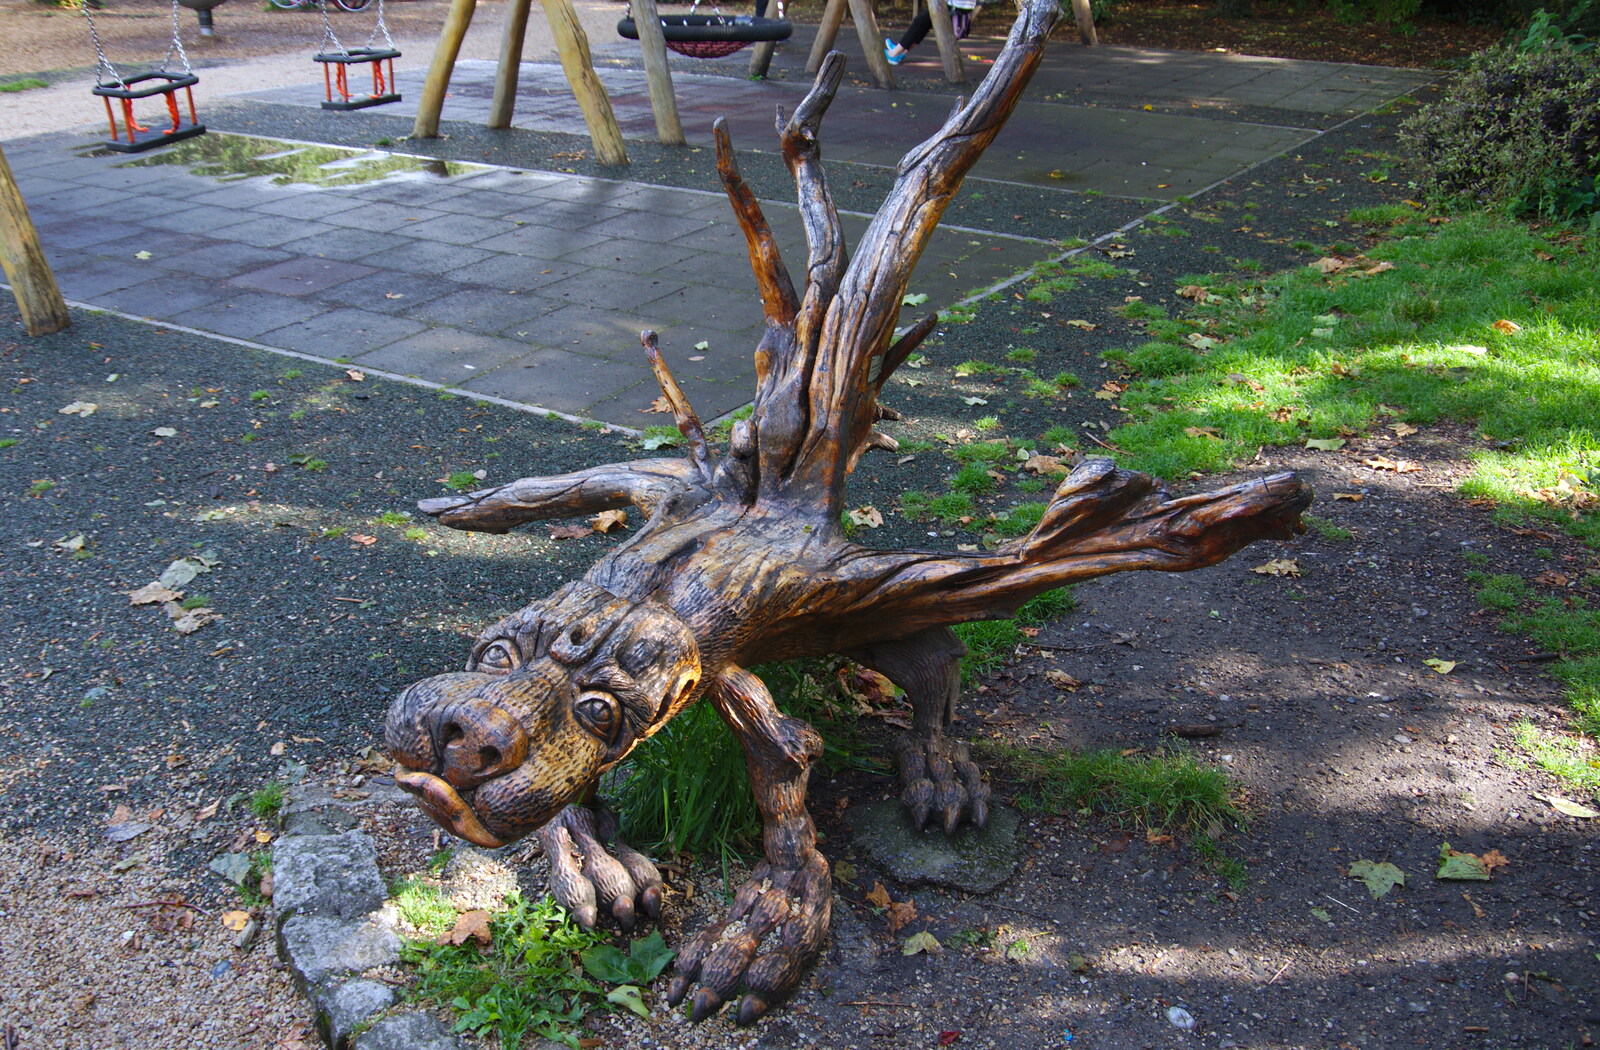 A tree stump turned into a dragon from Busking in Temple Bar, Dublin, Ireland - 12th August 2019